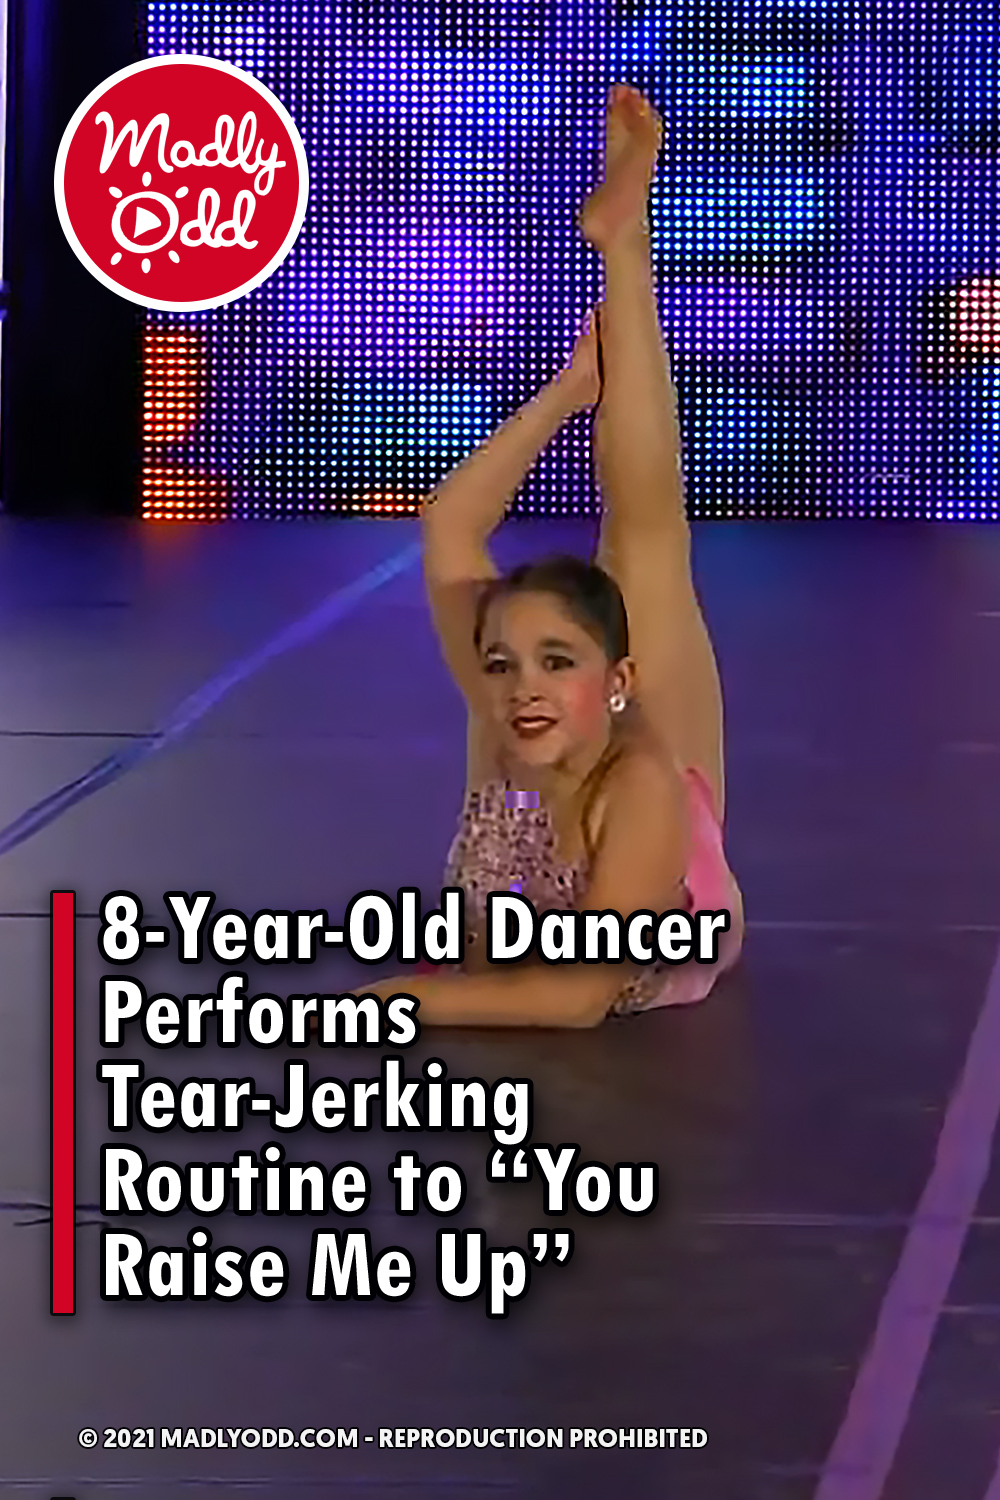 8-Year-Old Dancer Performs Tear-Jerking Routine to “You Raise Me Up”